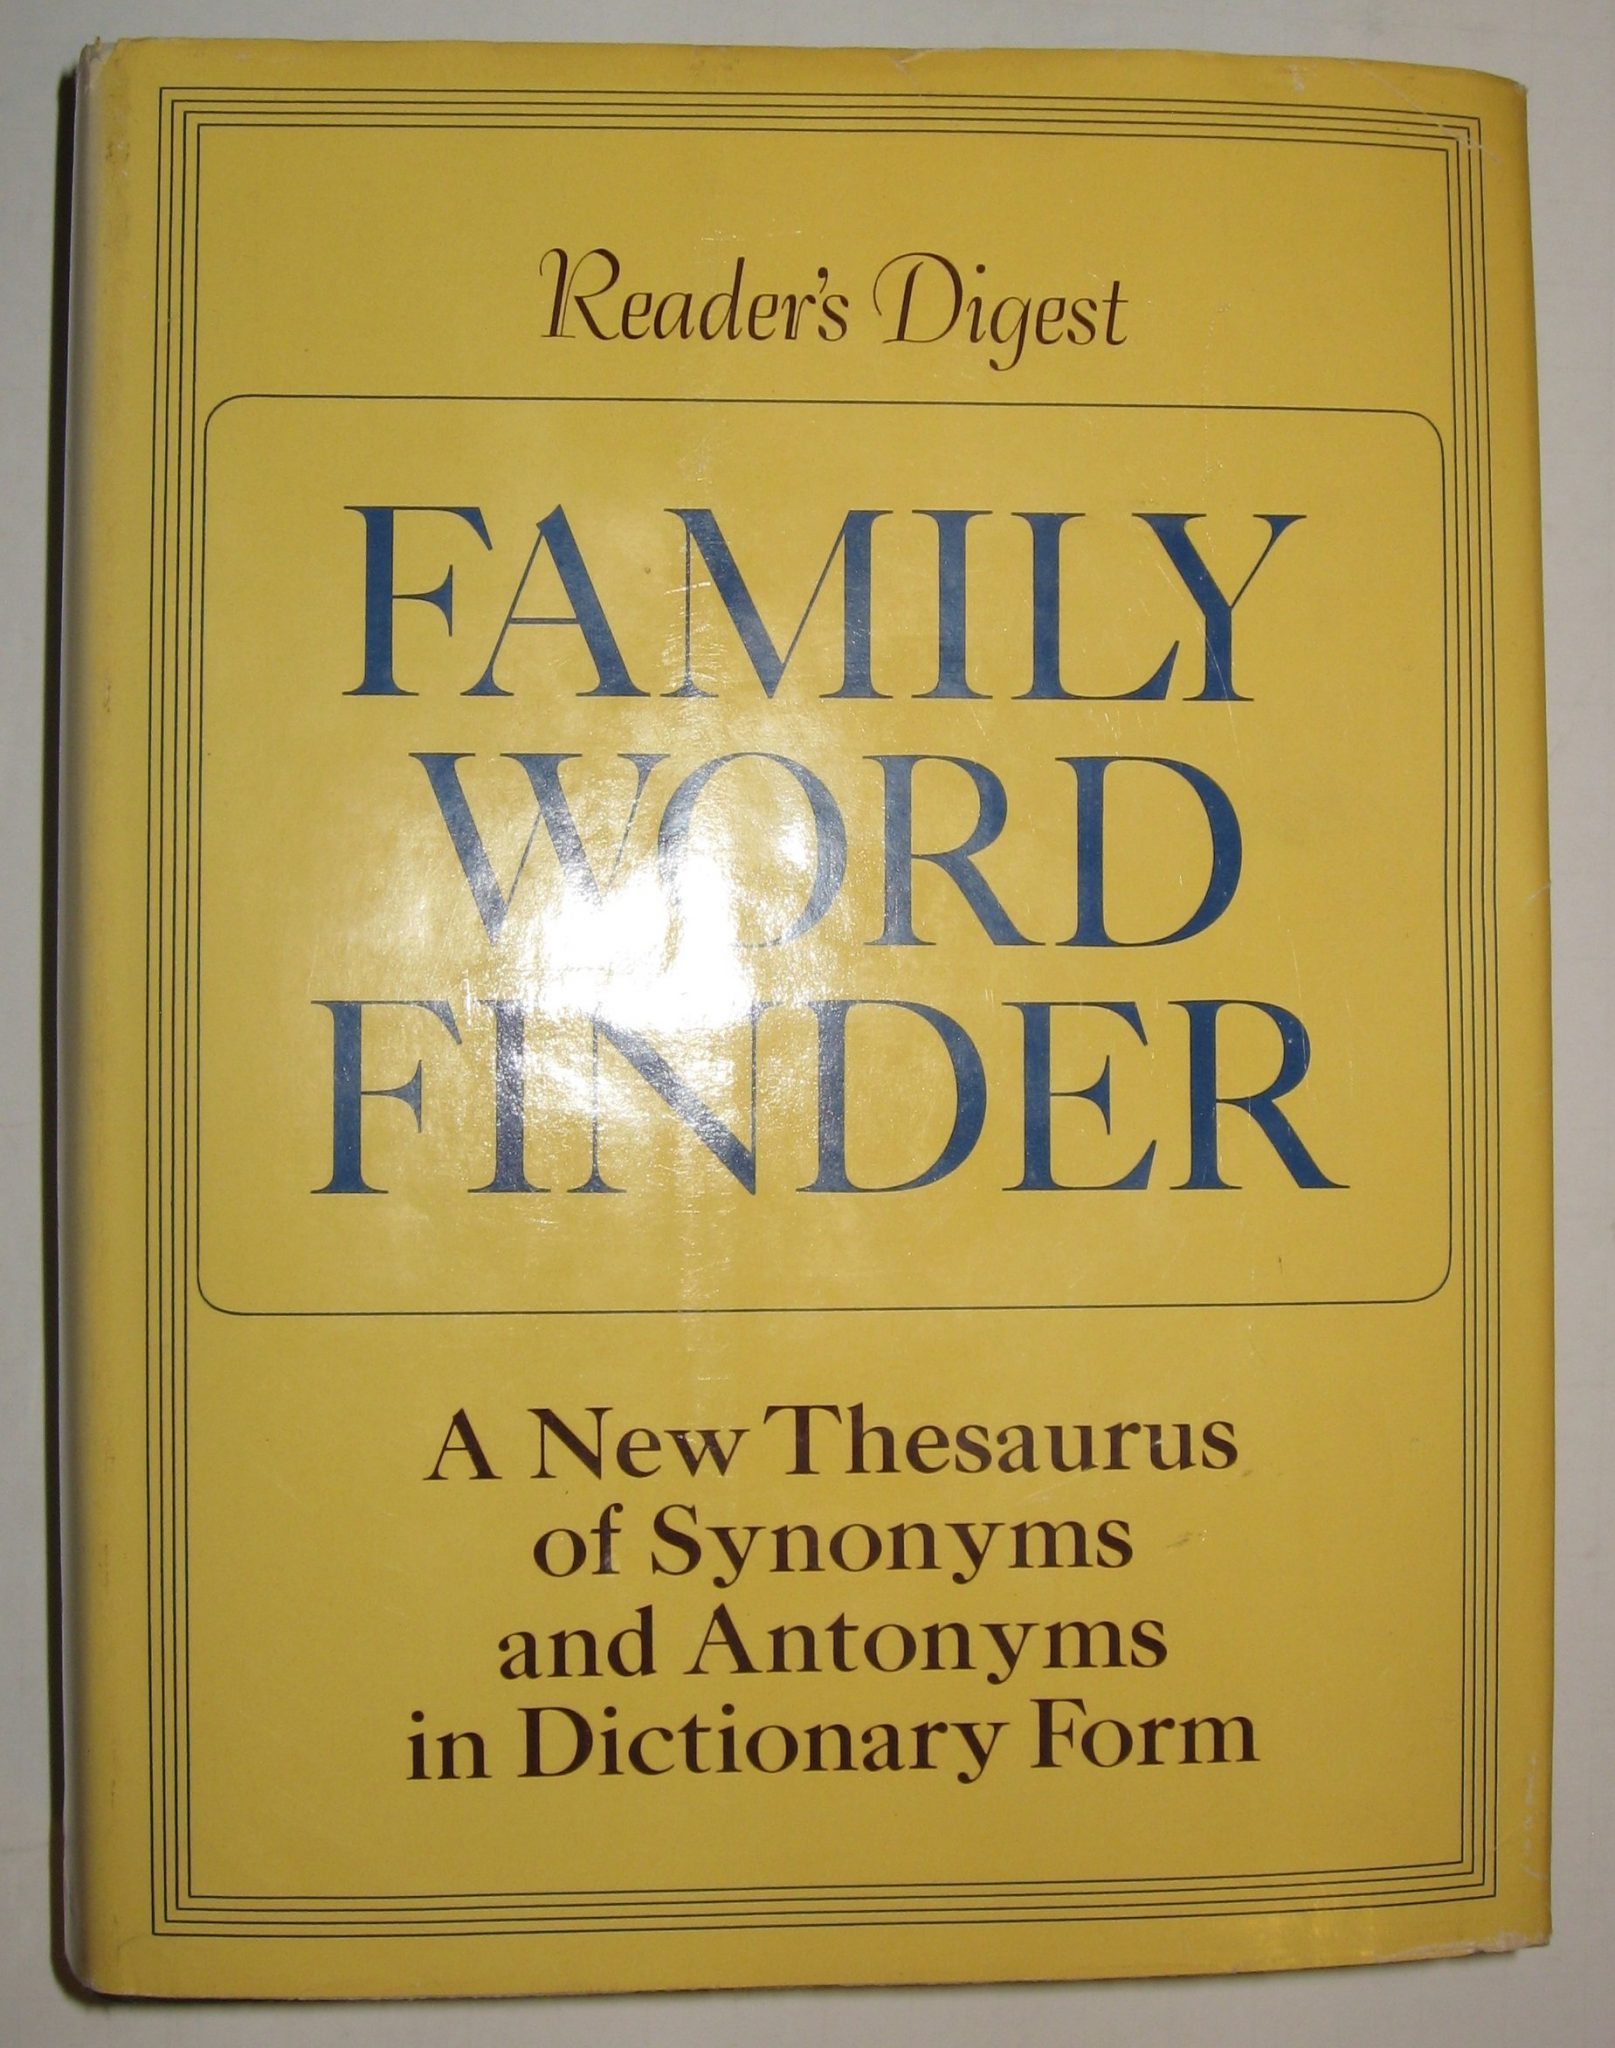 Family Word Finder A New Thesaurus of Synonyms and